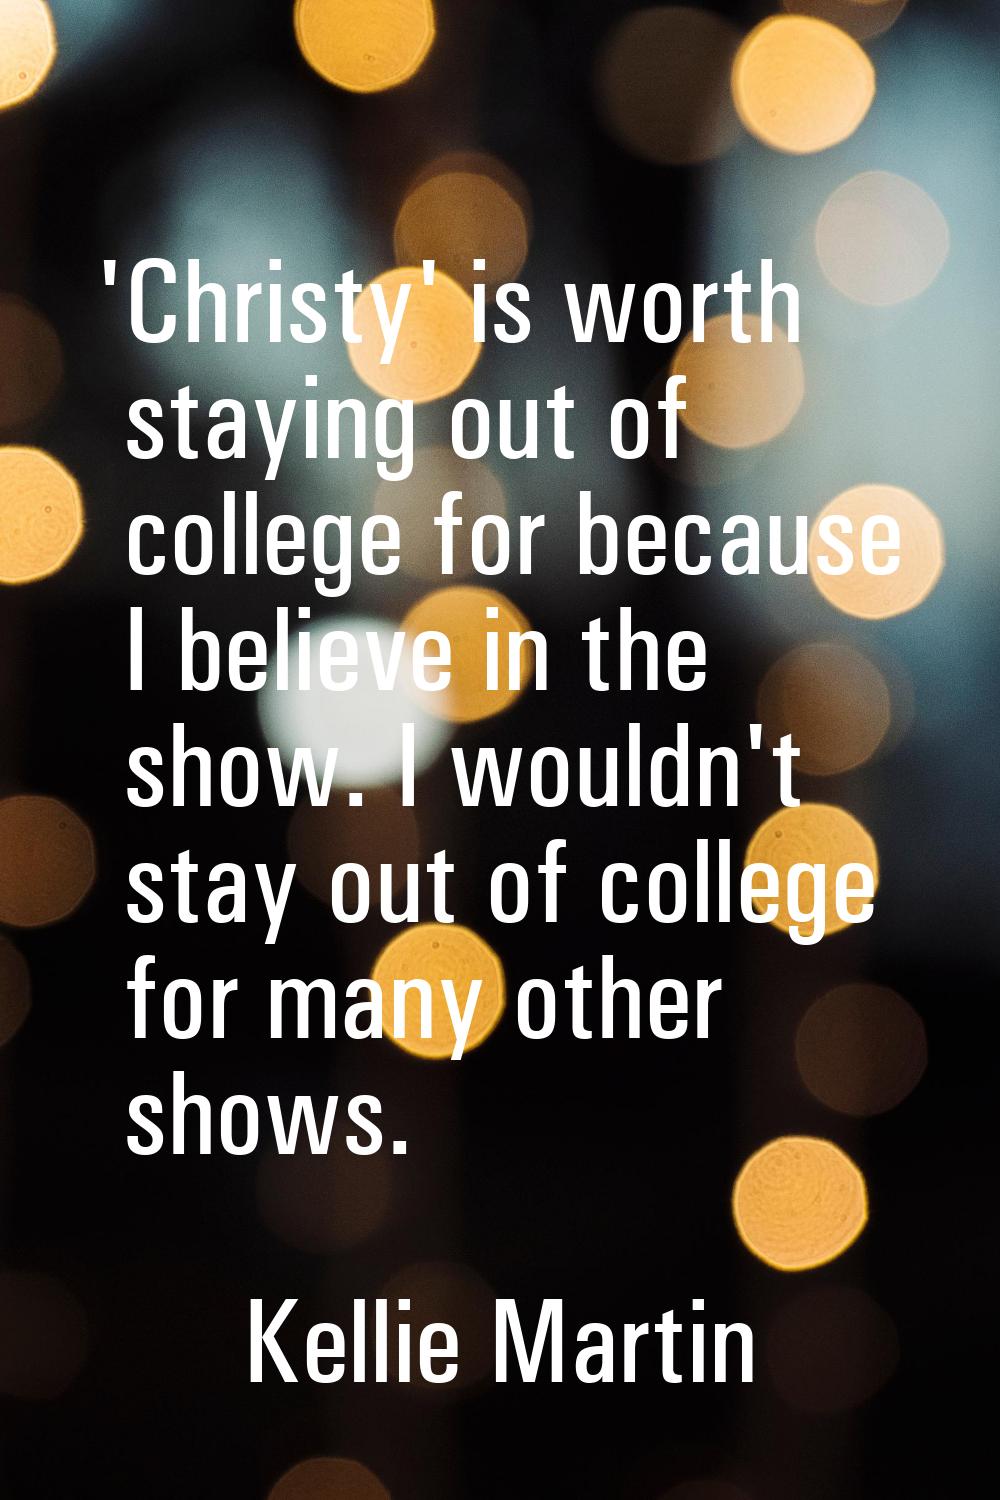 'Christy' is worth staying out of college for because I believe in the show. I wouldn't stay out of